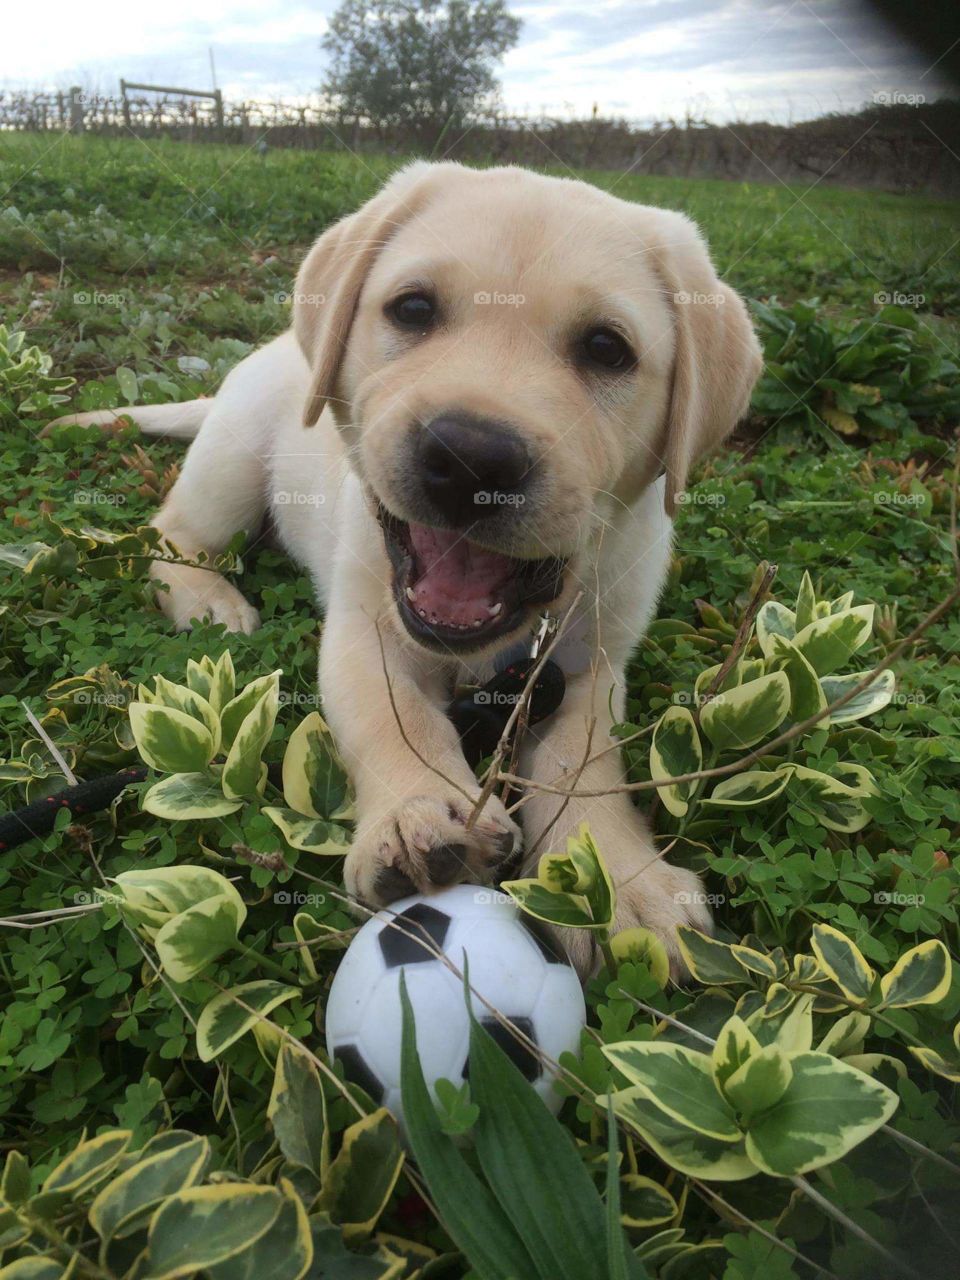 Puppy with ball. friends pet